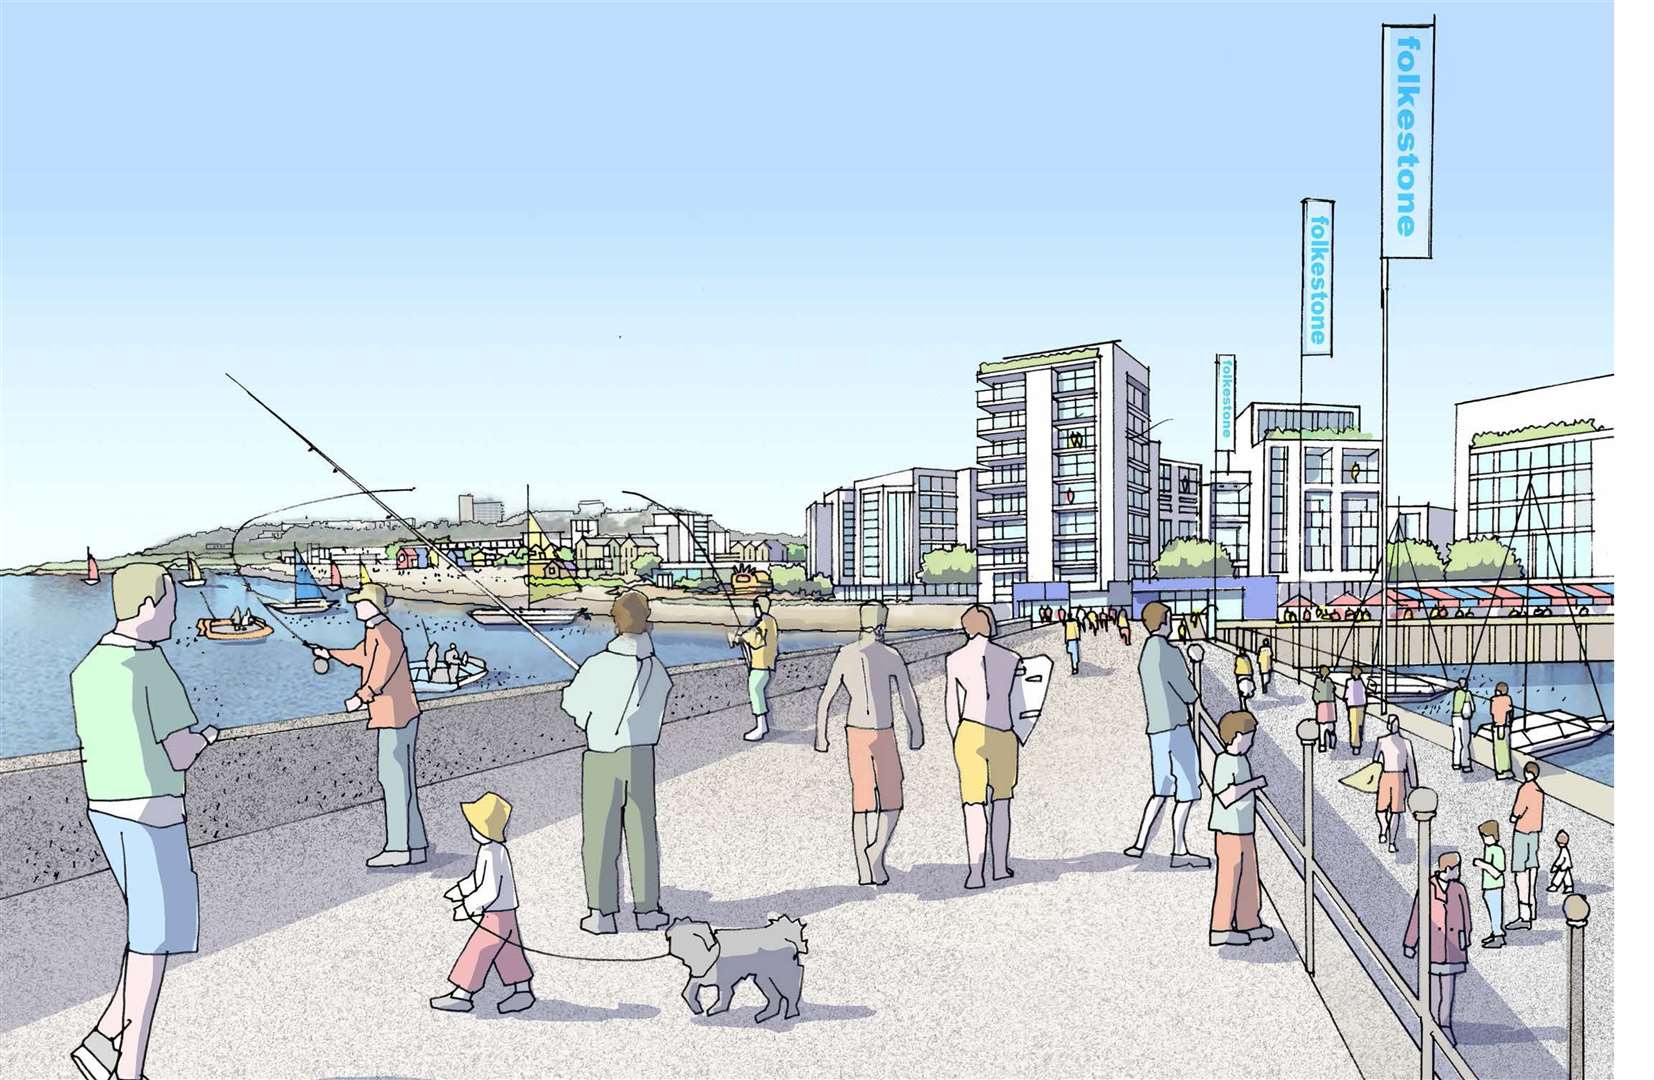 A proposed view of the Harbour Arm from 2012